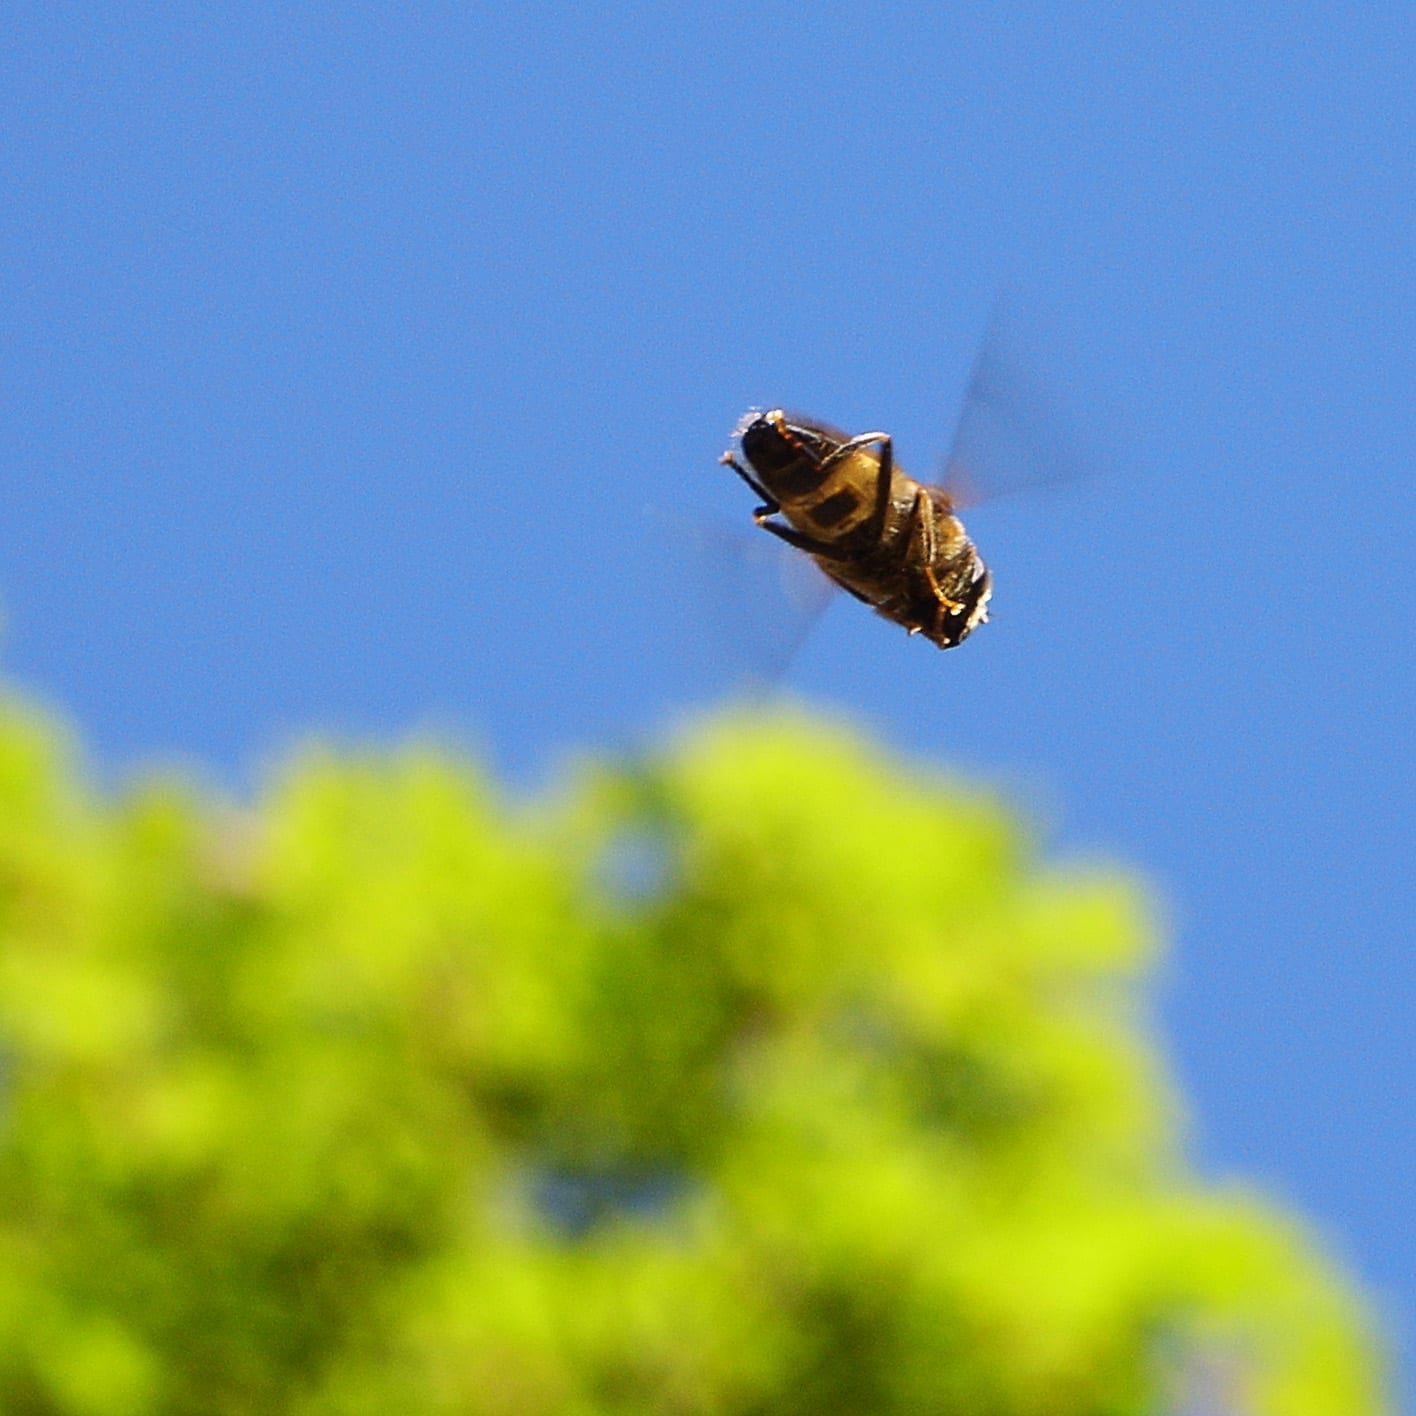 Image of a bee in flight.